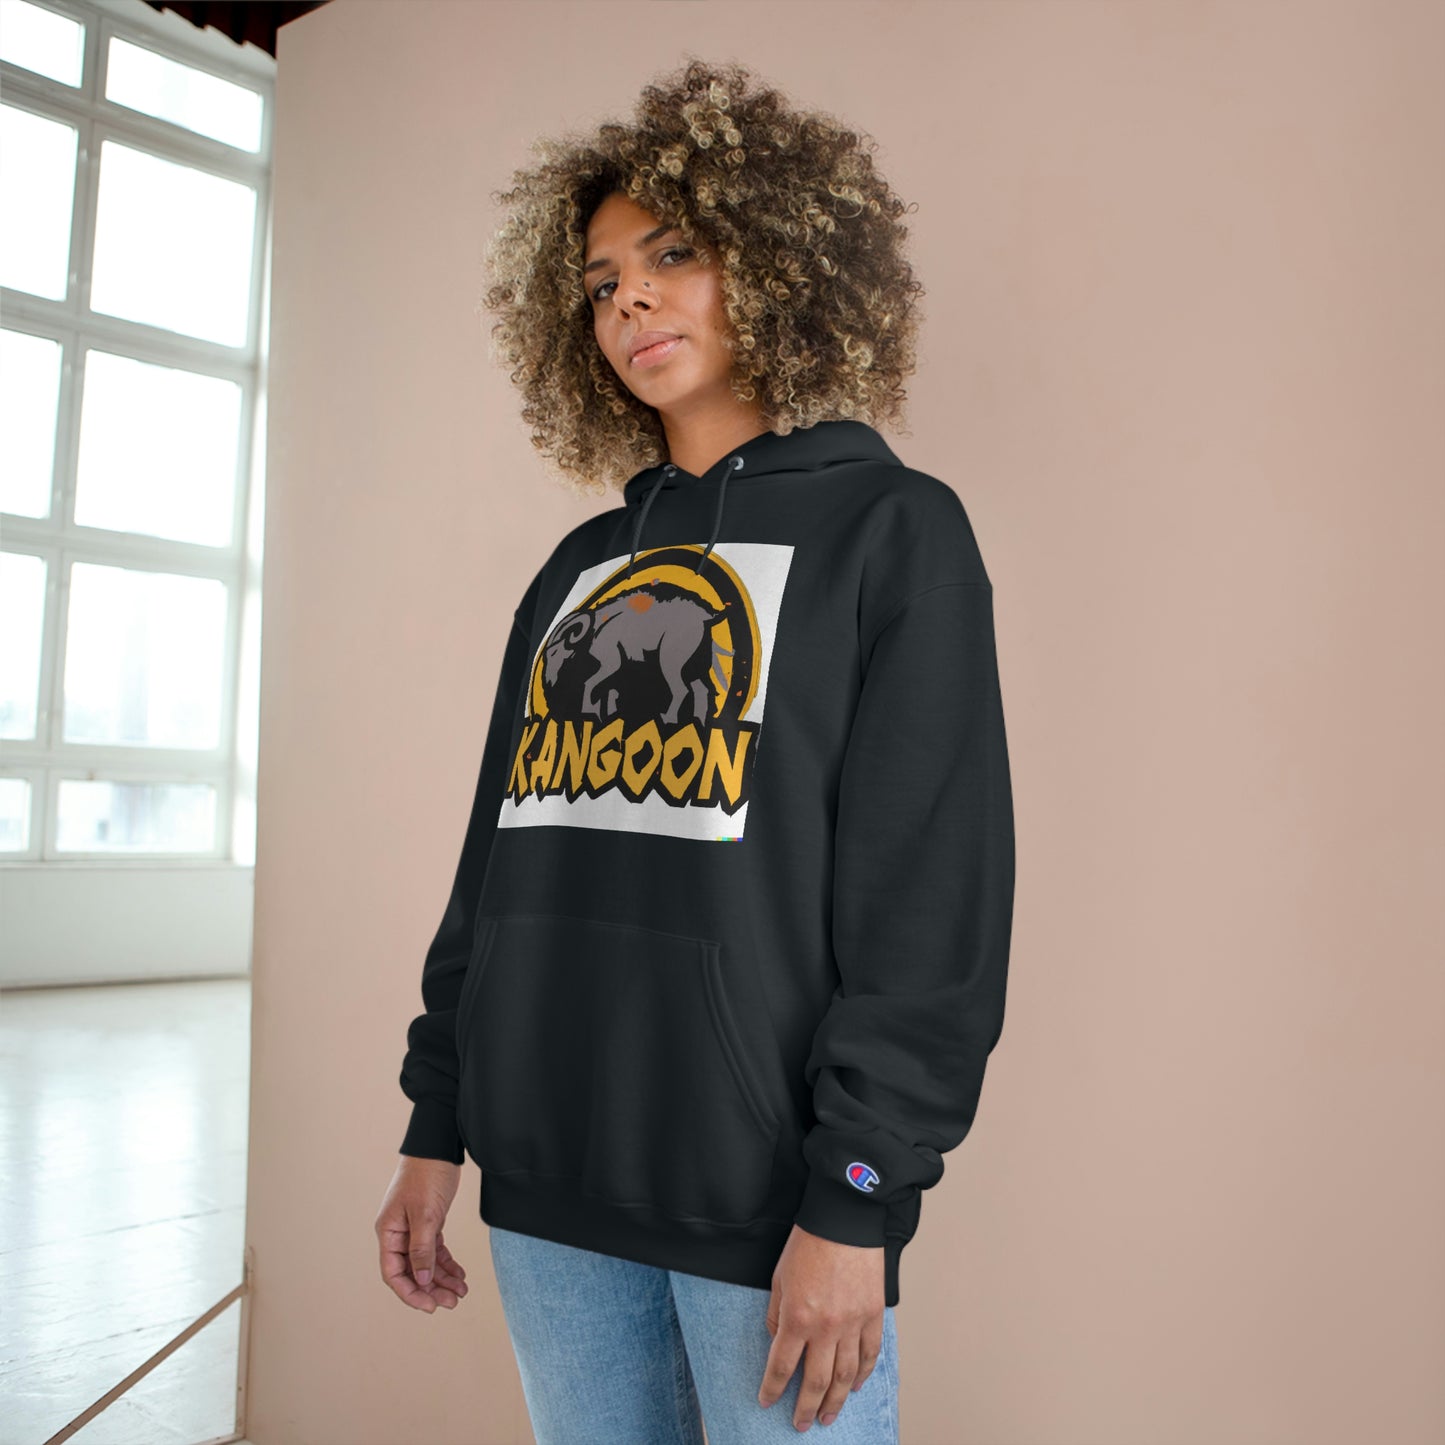 Hoodie Elevate Your Style with Konaloo's Kangoon Champion Hoodie - Perfect for Everyday Wear or as a Unique Gift!